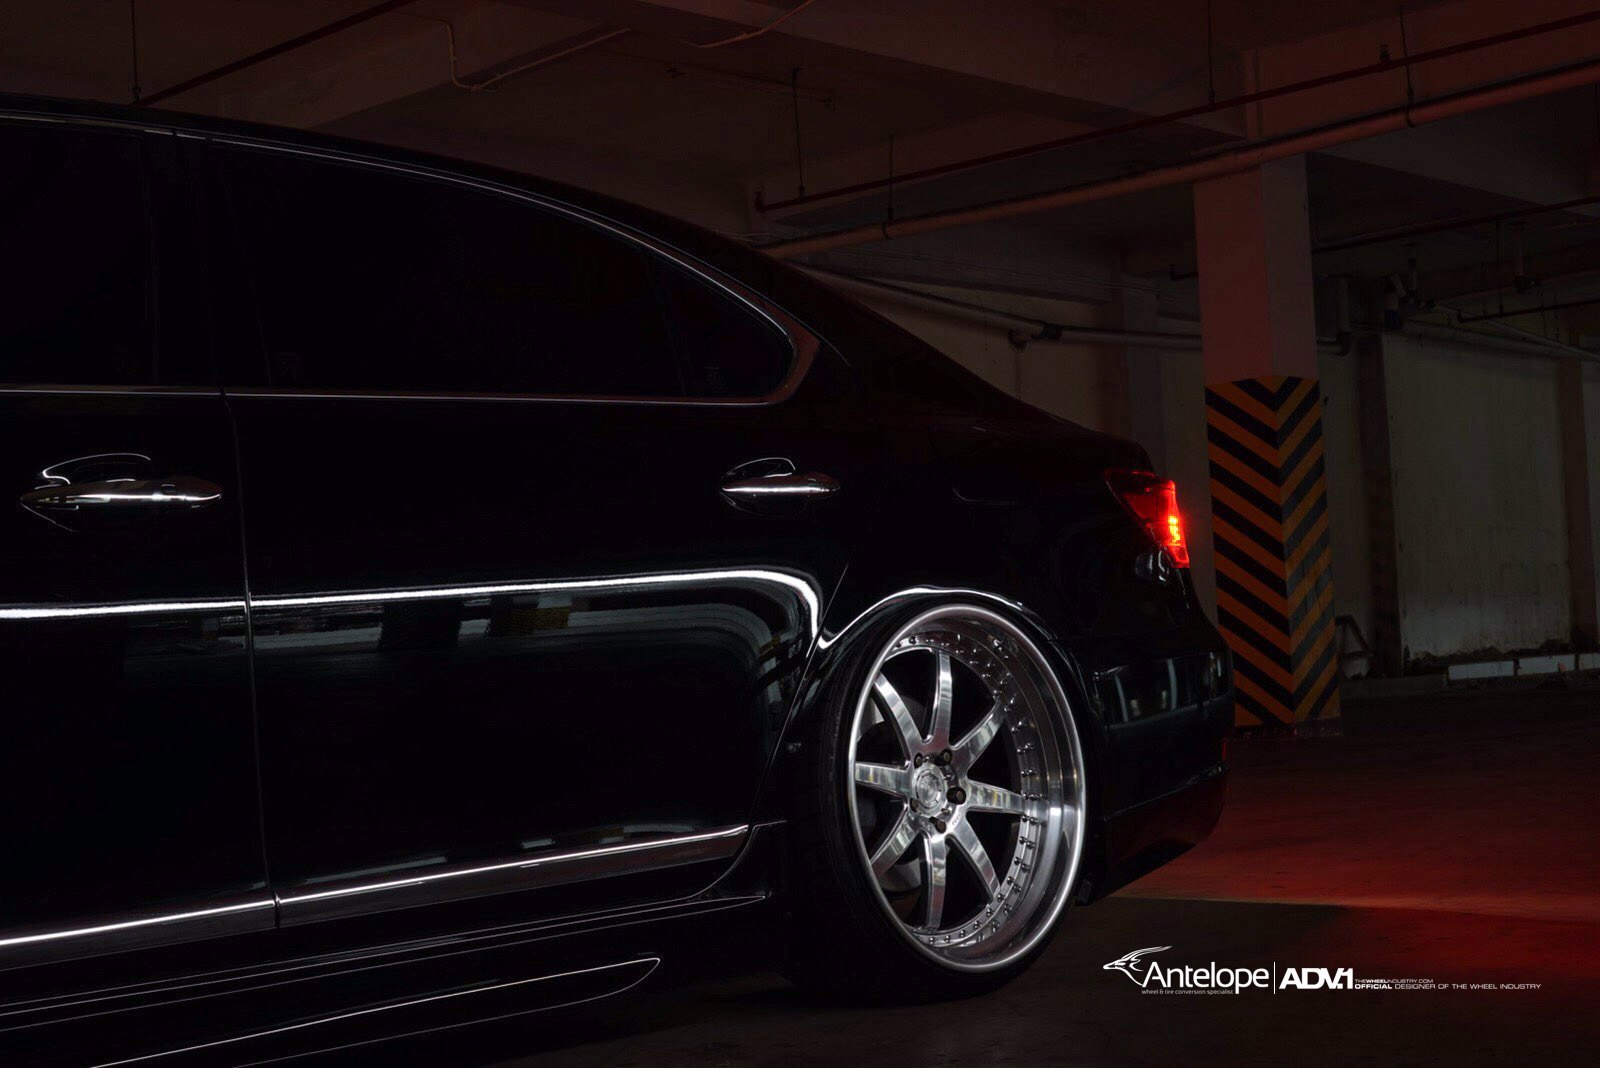 Aftermarket Side Skirts on Black Lexus LS - Photo by ADV.1